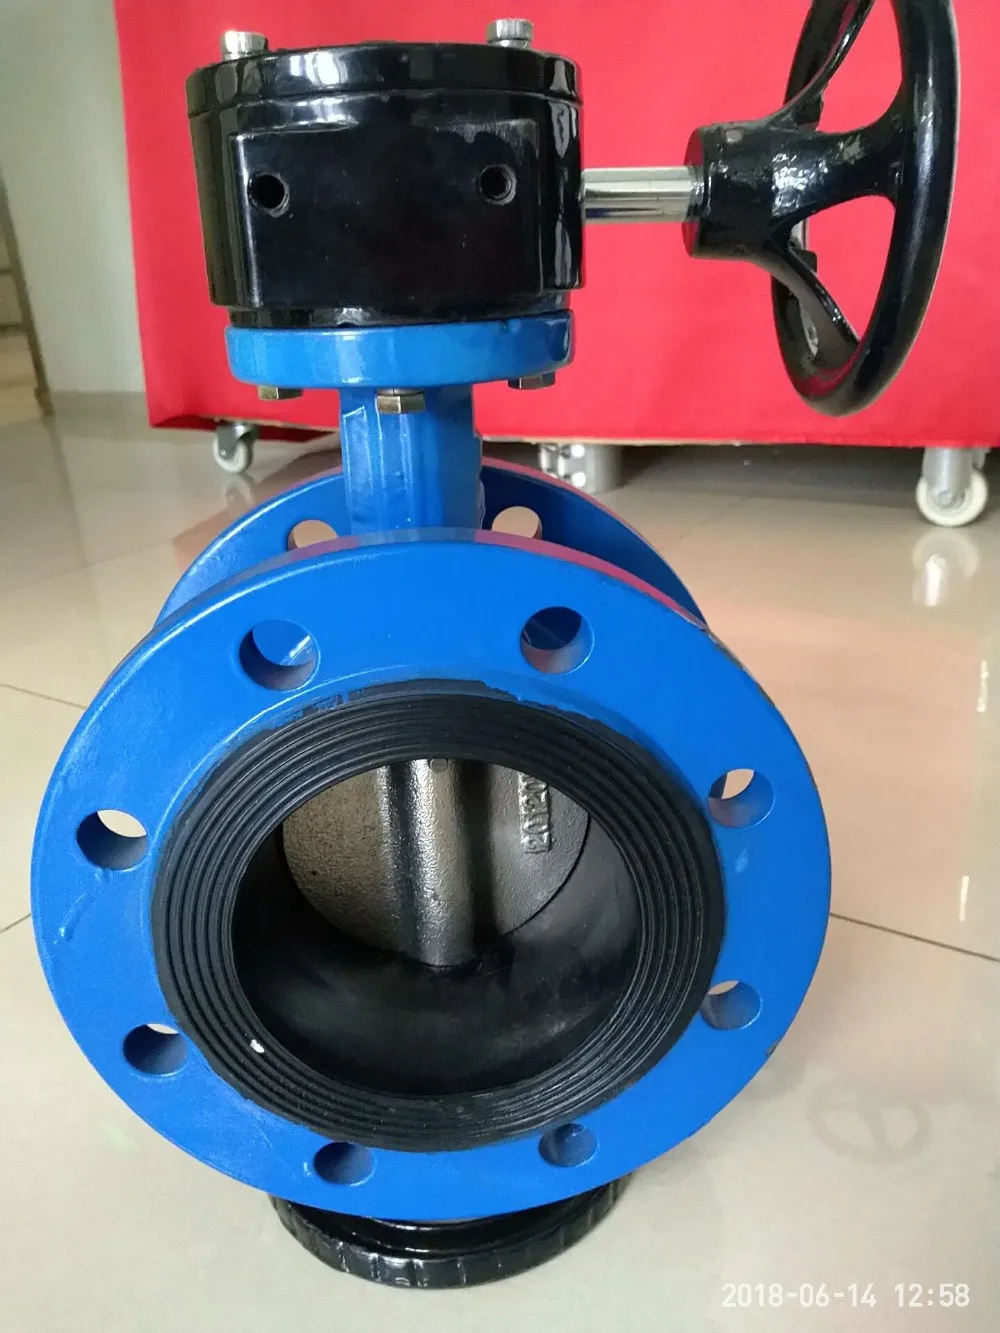 Install A Ductile Iron Material Butterfly Valve With The Application